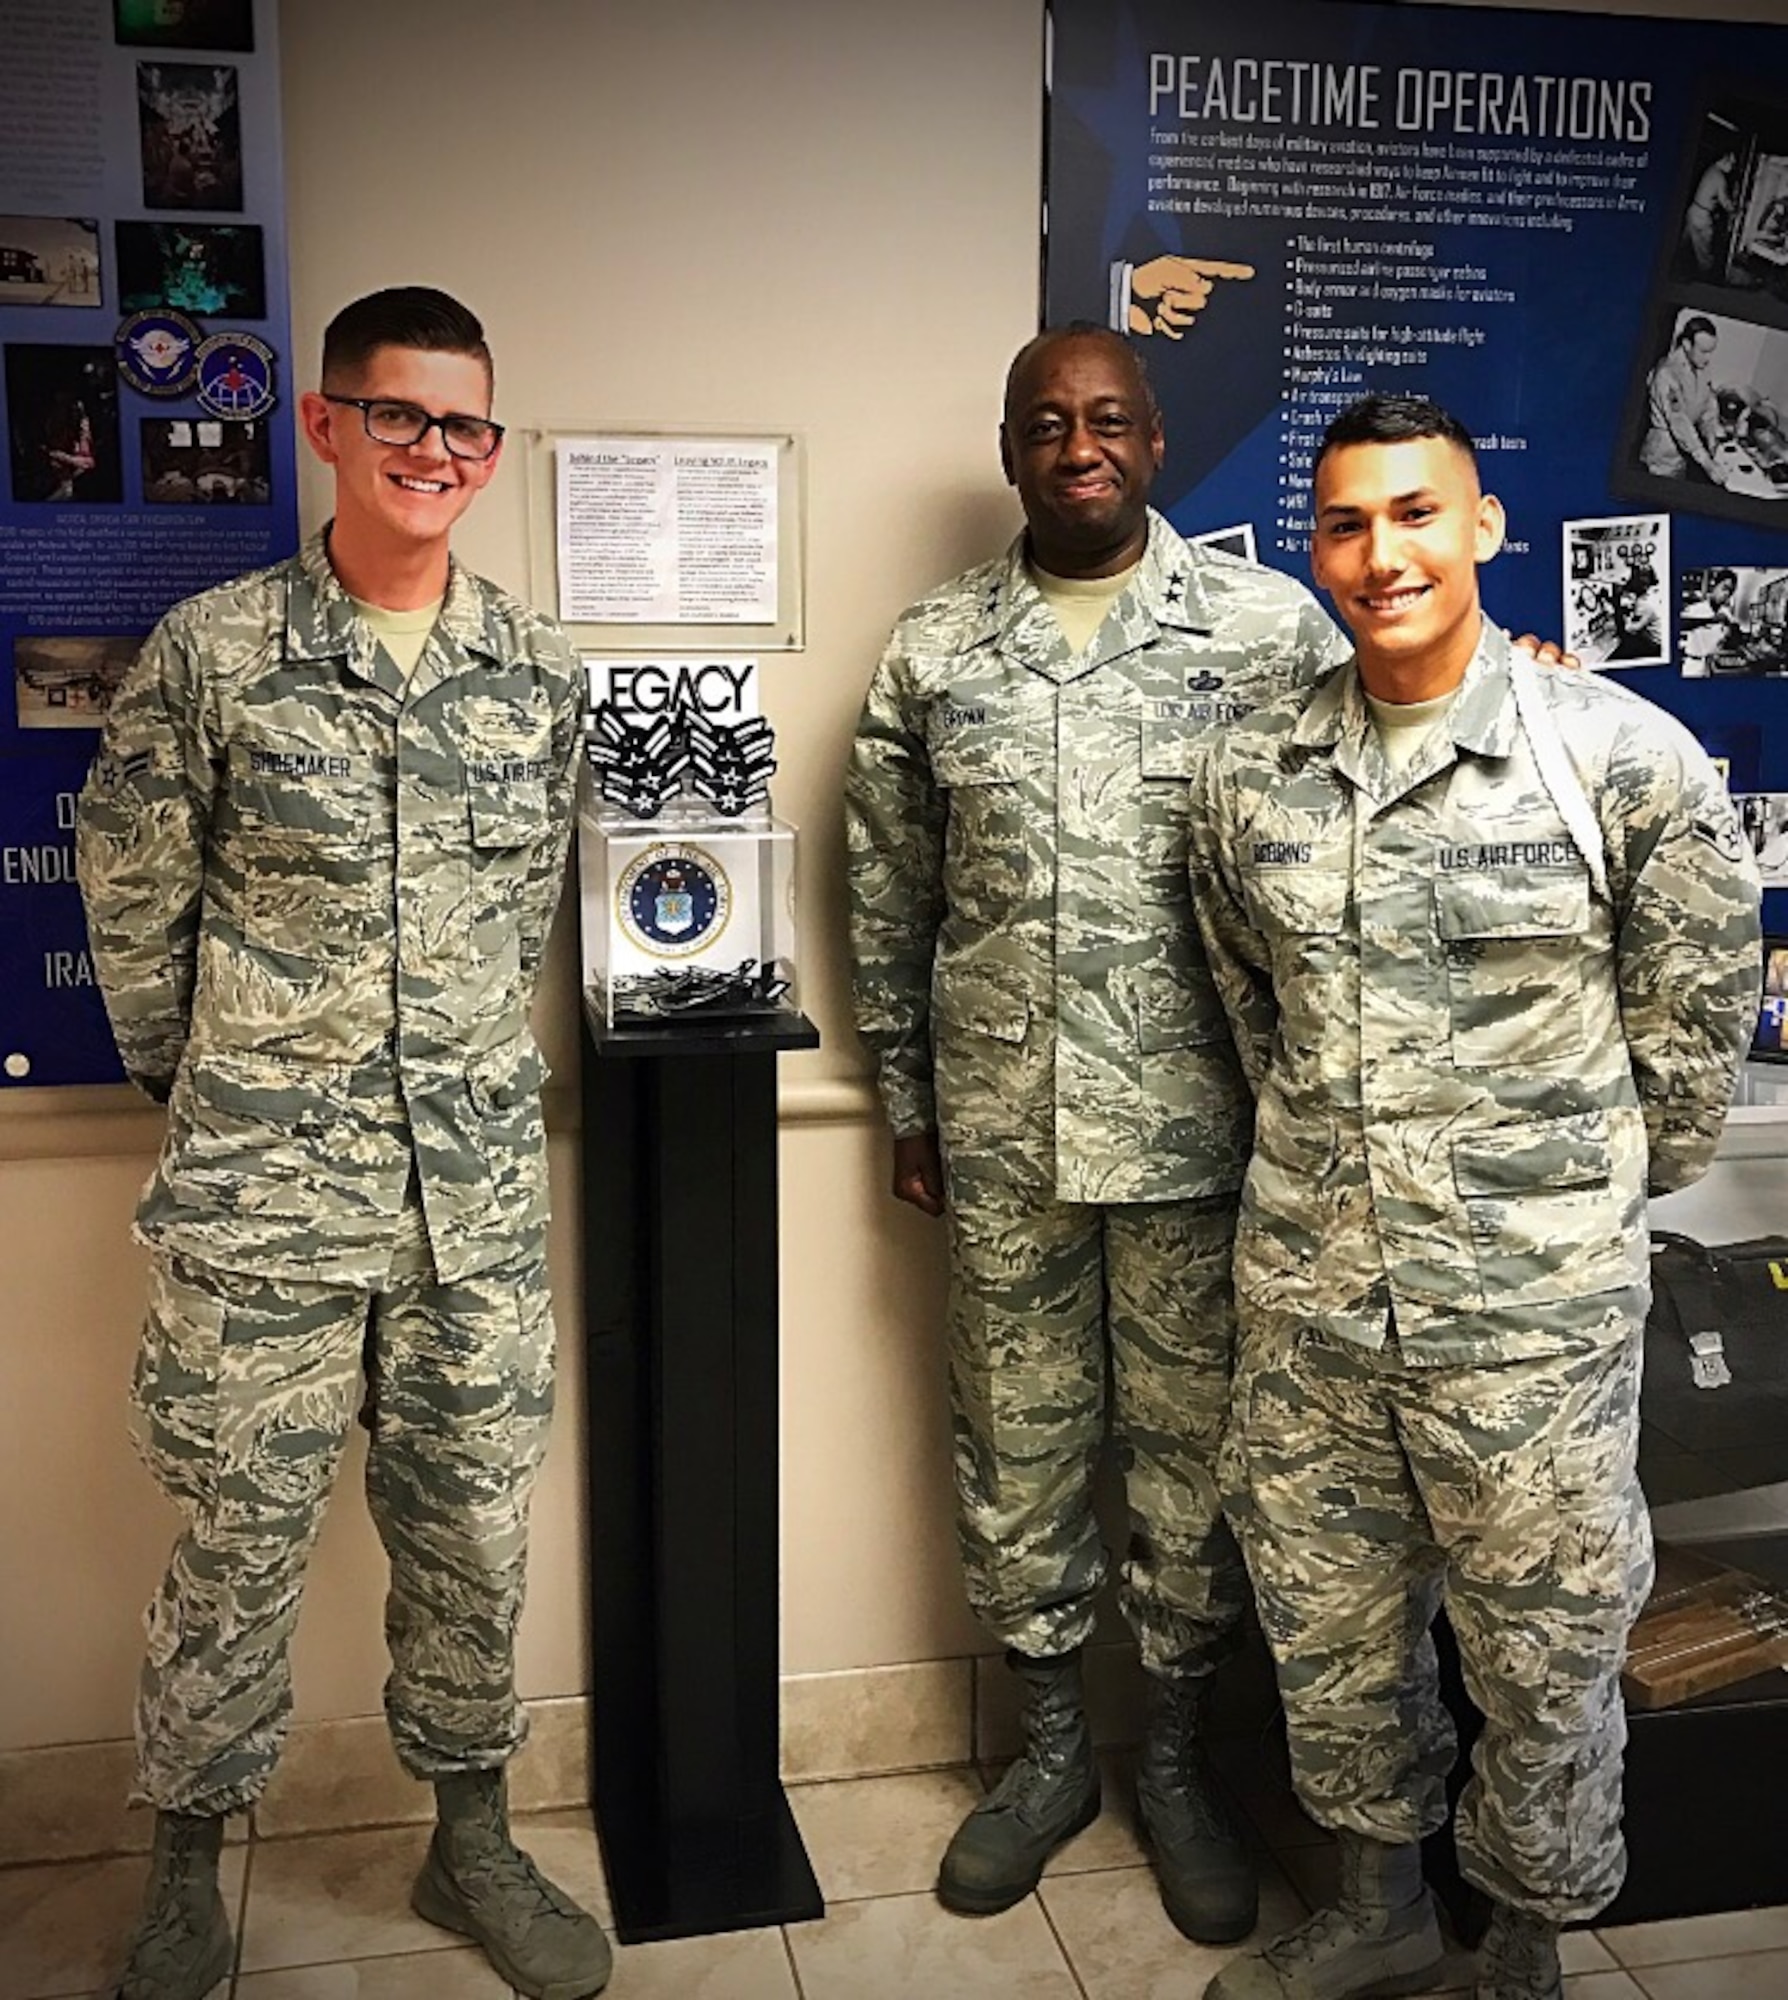 U.S. Air Force Maj. Gen. Mark Brown, deputy commander of Air Education and Training Command, stands with Airman 1st Class Michael Shoemaker and Airman 1st Class Anthony Robbins, founder and cofounder of the Legacy Stripes Program, June 13, 2017, at Joint Base San Antonio-Fort Sam Houston, Texas. To honor the legacy that service members create, Shoemaker and Robbins while still in technical training, saw an opportunity to encourage the donation of more than 1,000 sought-after stripes within a six-month period.